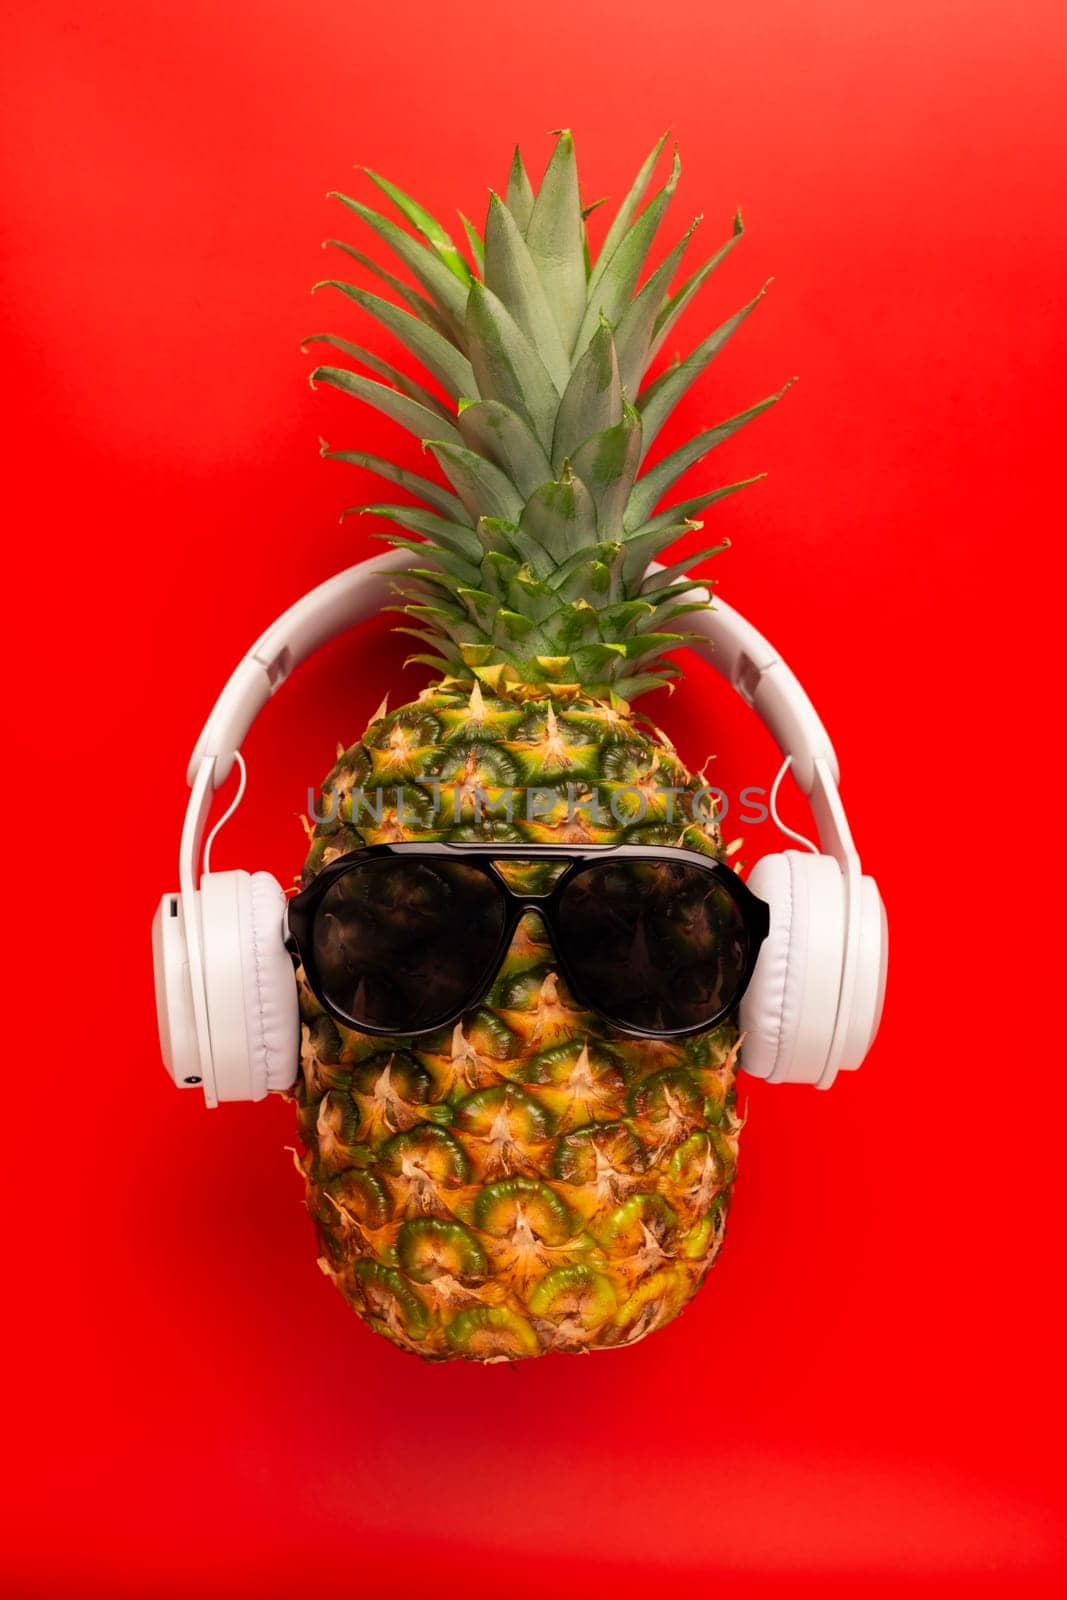 Ripe pineapple with sunglasses and headphones on red background by andreyz